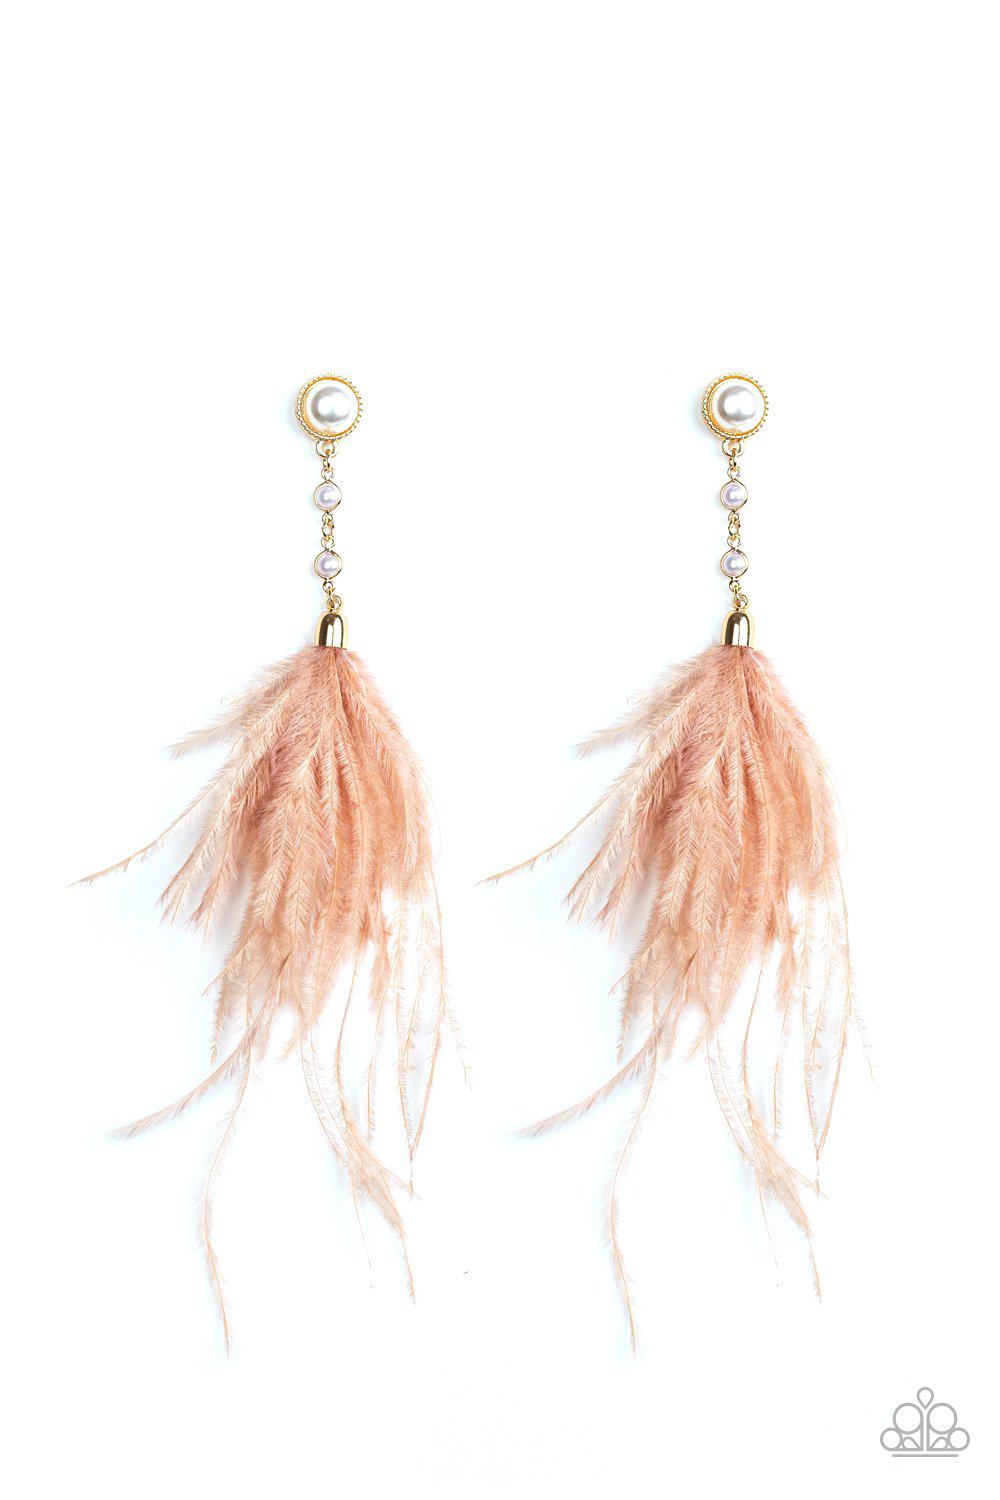 Vegas Vixen Pink and Gold Feather Earrings - Paparazzi Accessories-CarasShop.com - $5 Jewelry by Cara Jewels